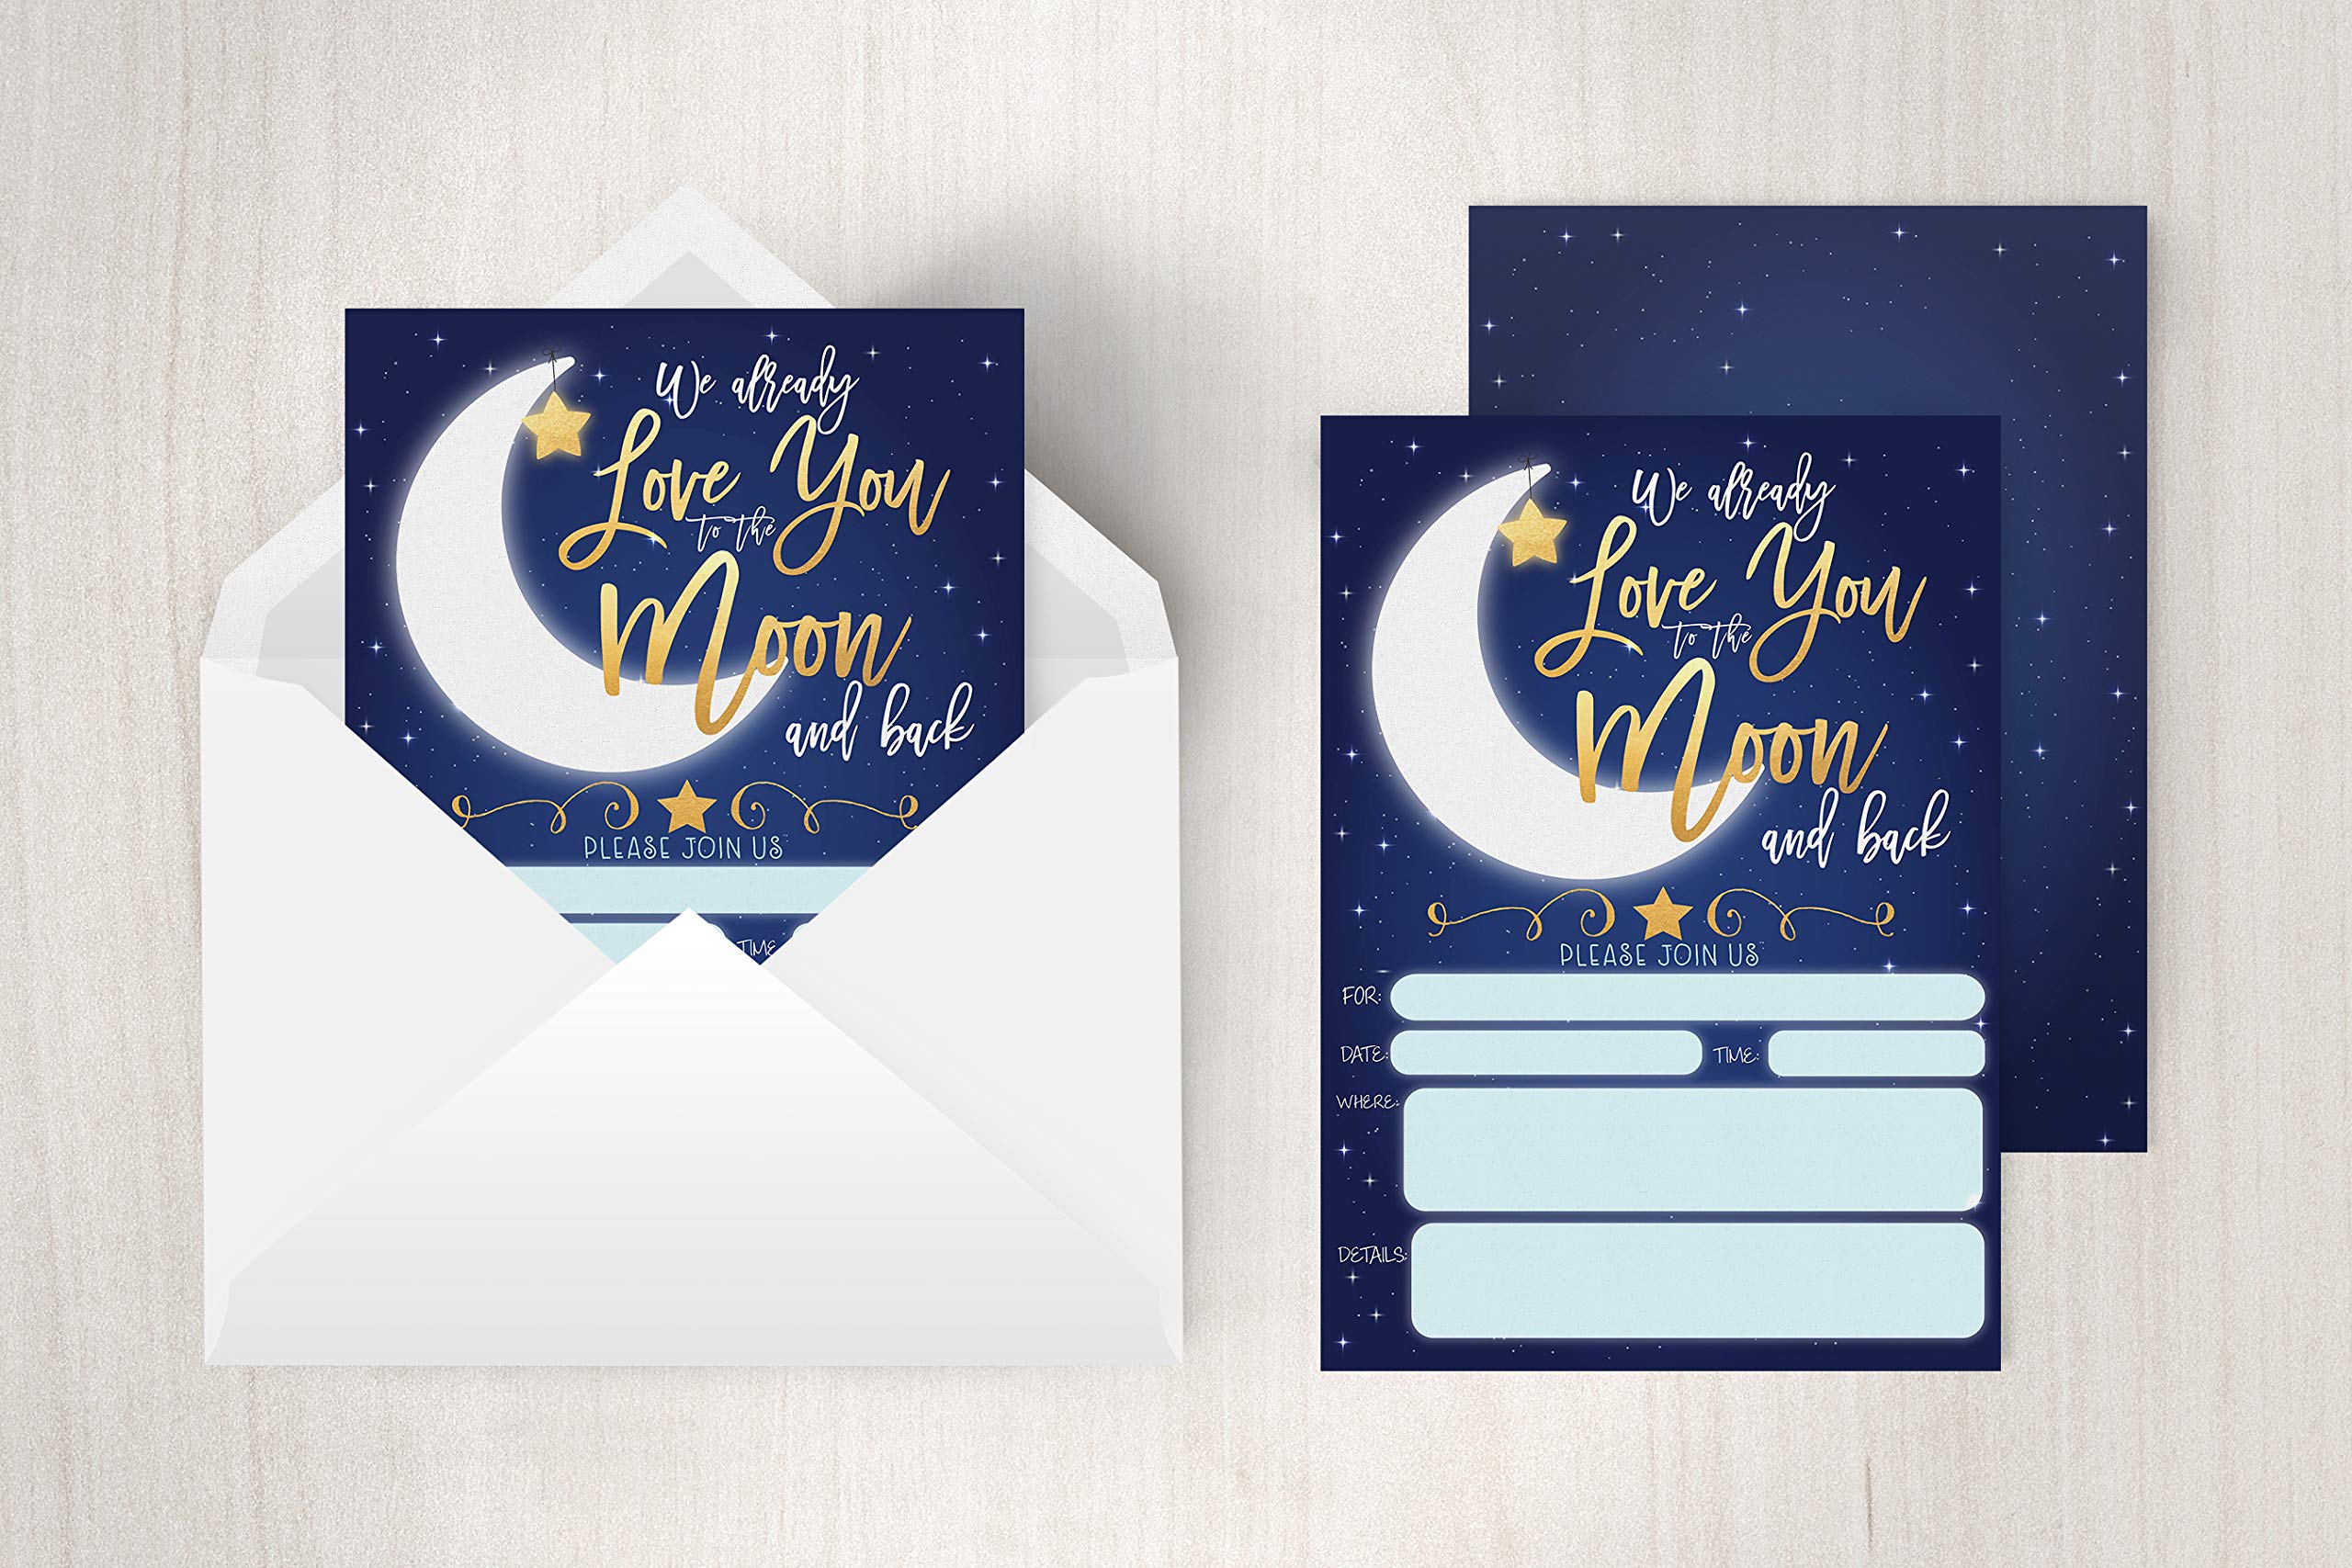 Your Main Event Prints Baby Shower Invitations with Book Request and Diaper Raffle Card, Love You To The Moon and Back, Twinkle Star Baby Sprinkle, 20 Fill in Invites and Envelopes